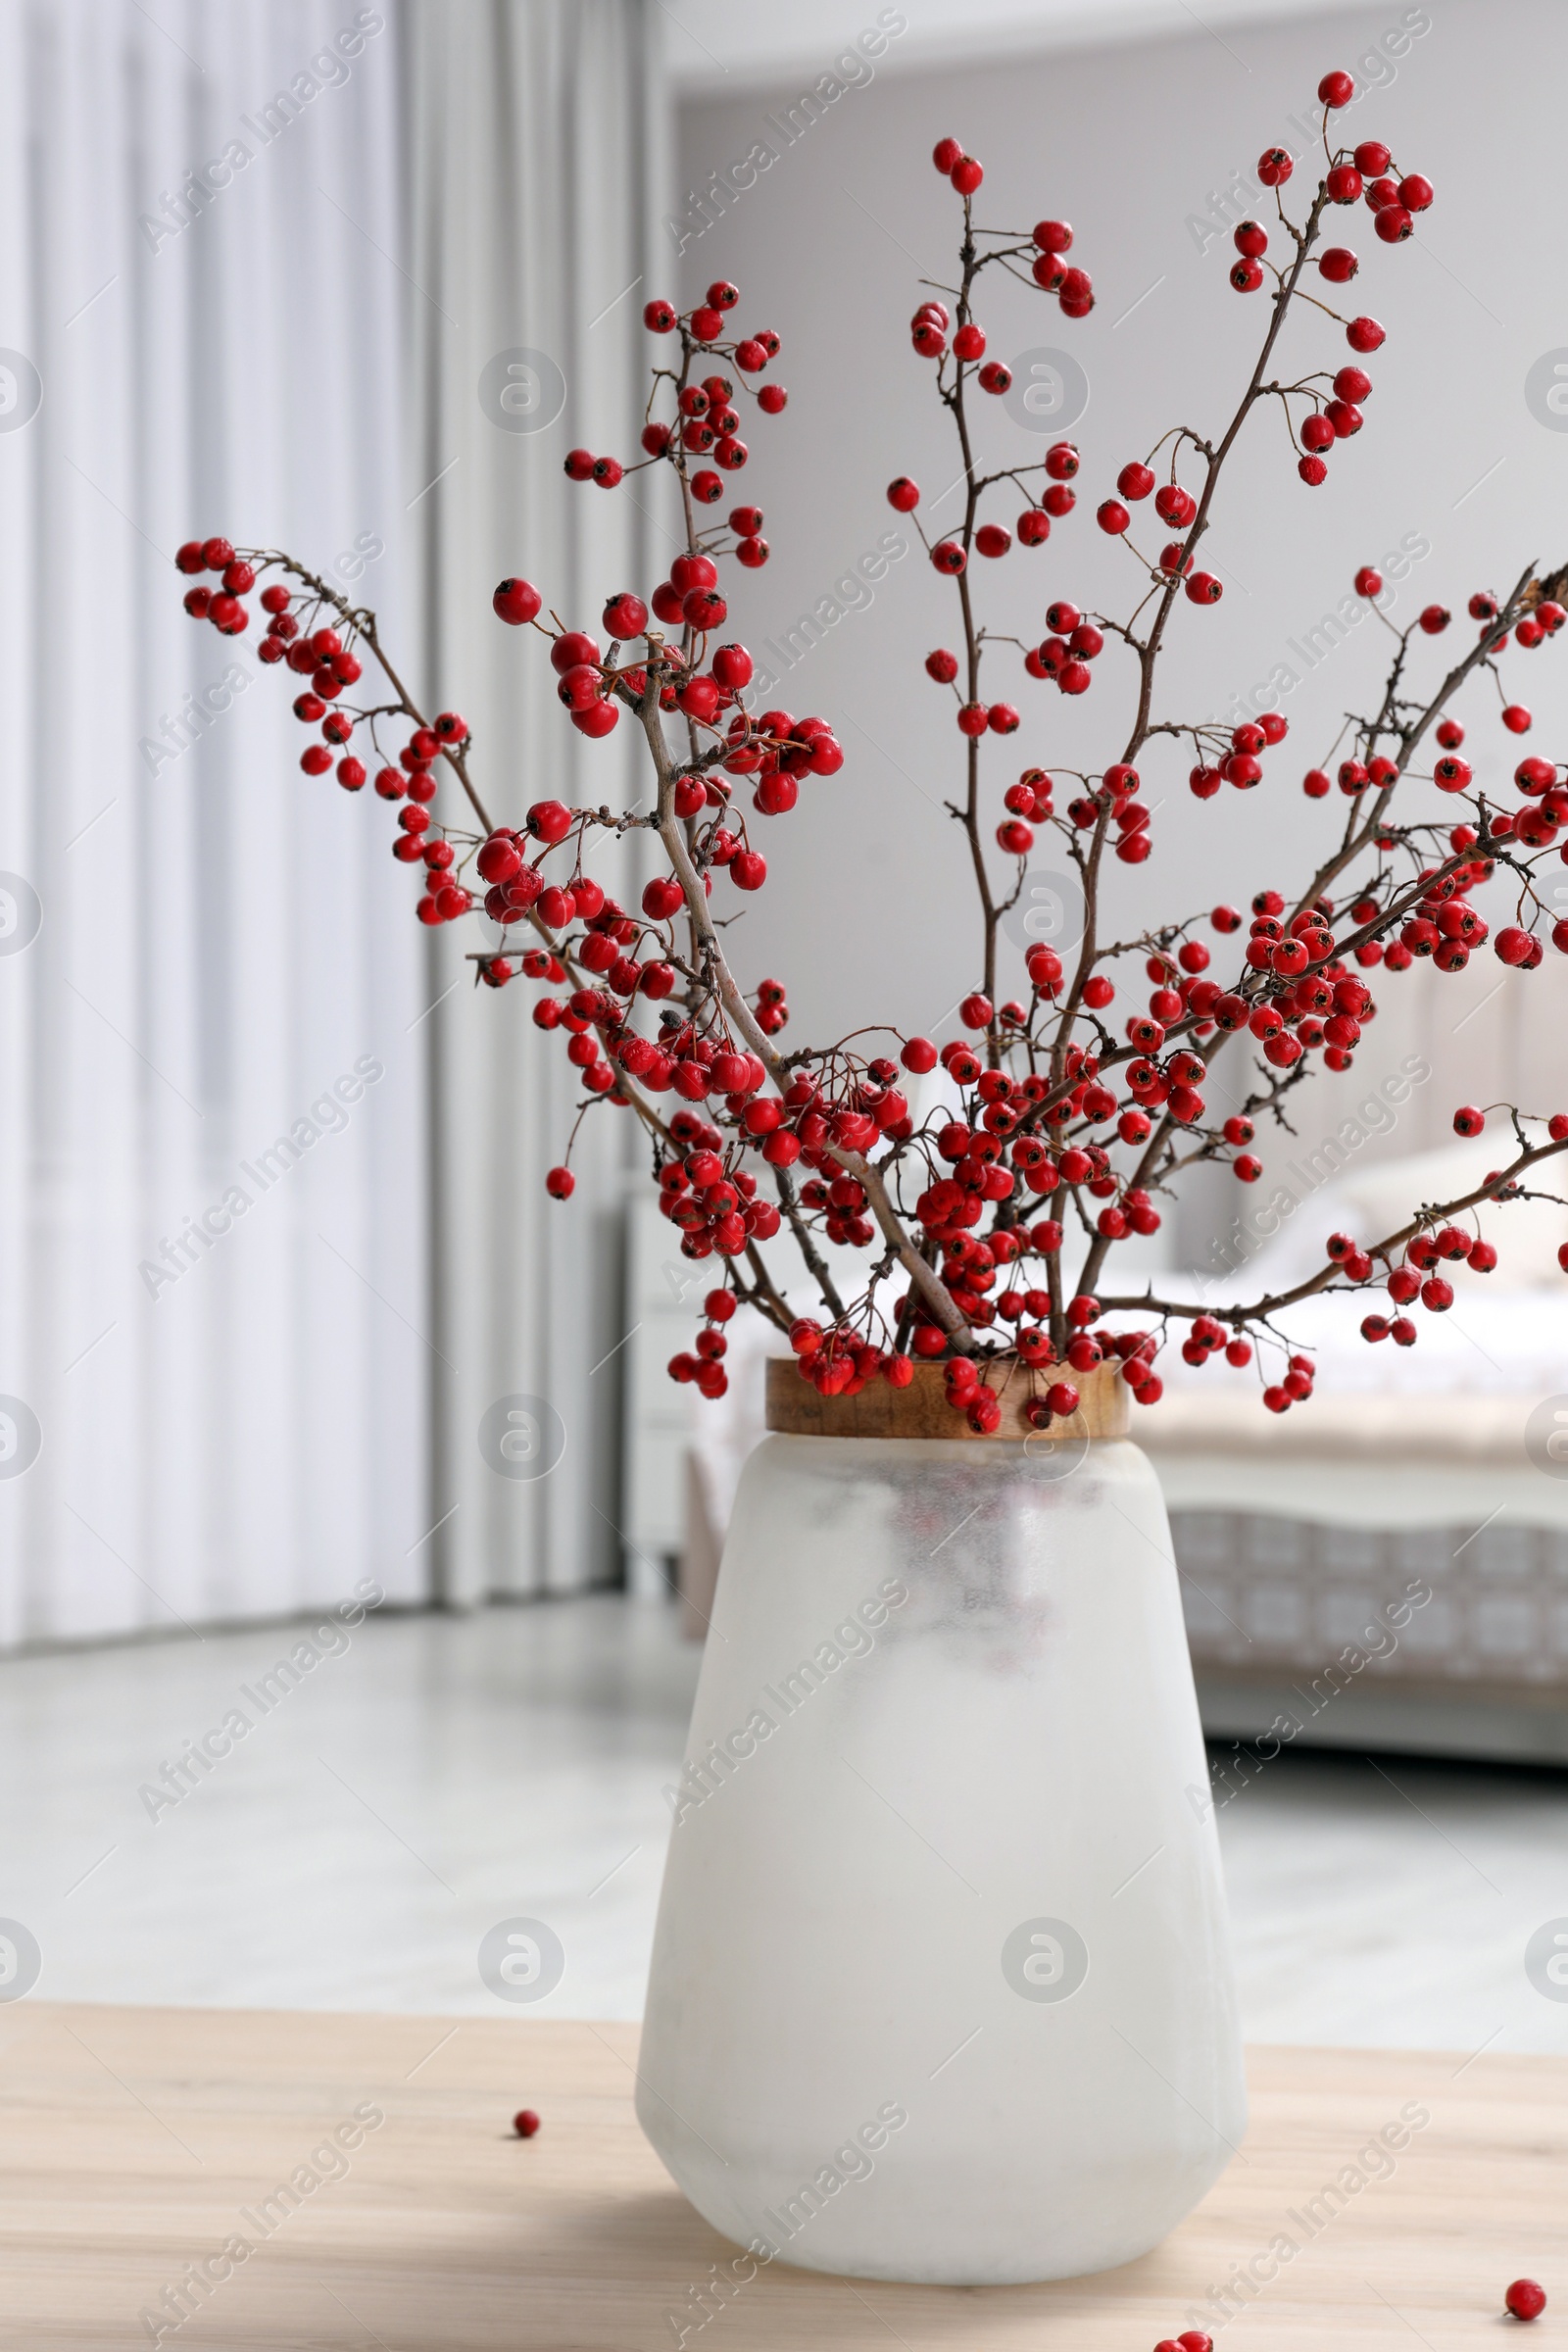 Photo of Hawthorn branches with red berries on wooden table in bedroom